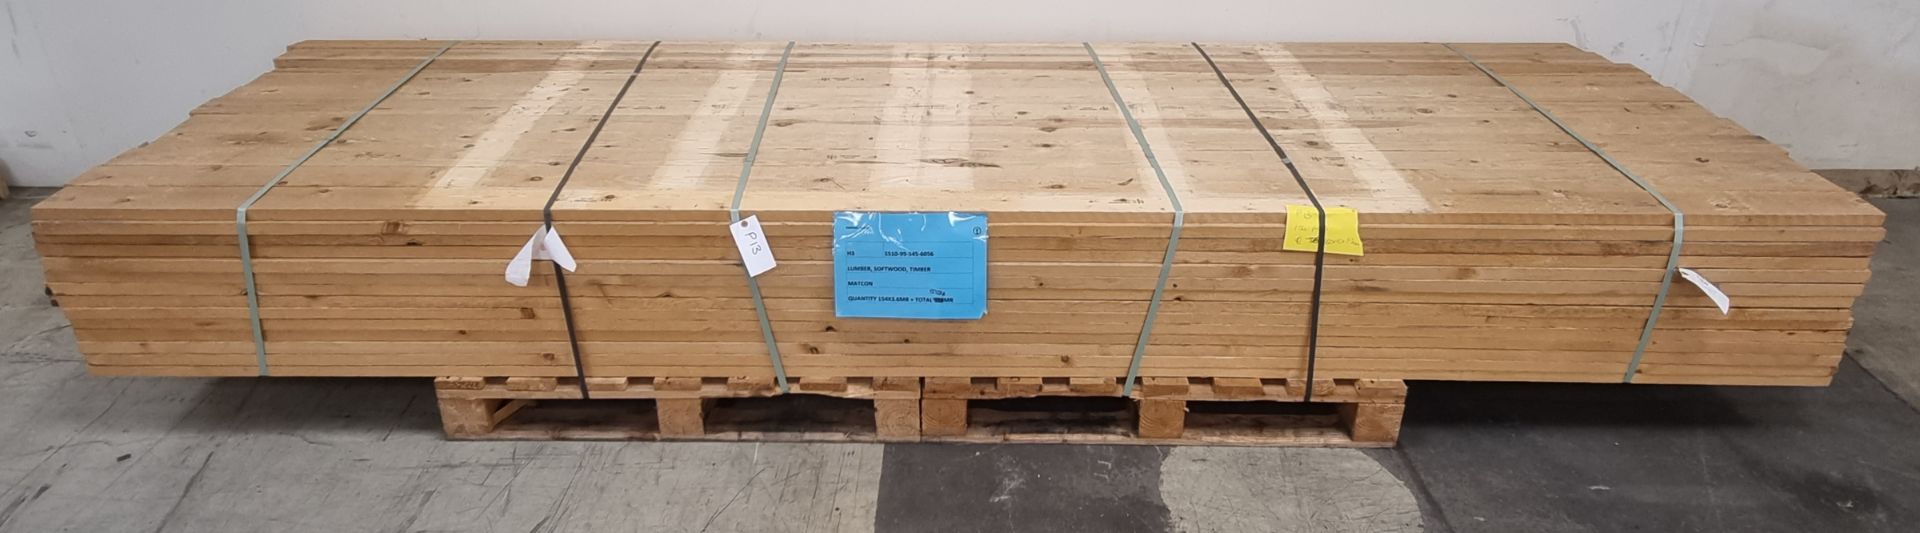 Pallet of 4"x1" (10x2.5cm) softwood, heat treated and debarked (GBFC-0452 DBHT) - L360cm - 154 pcs